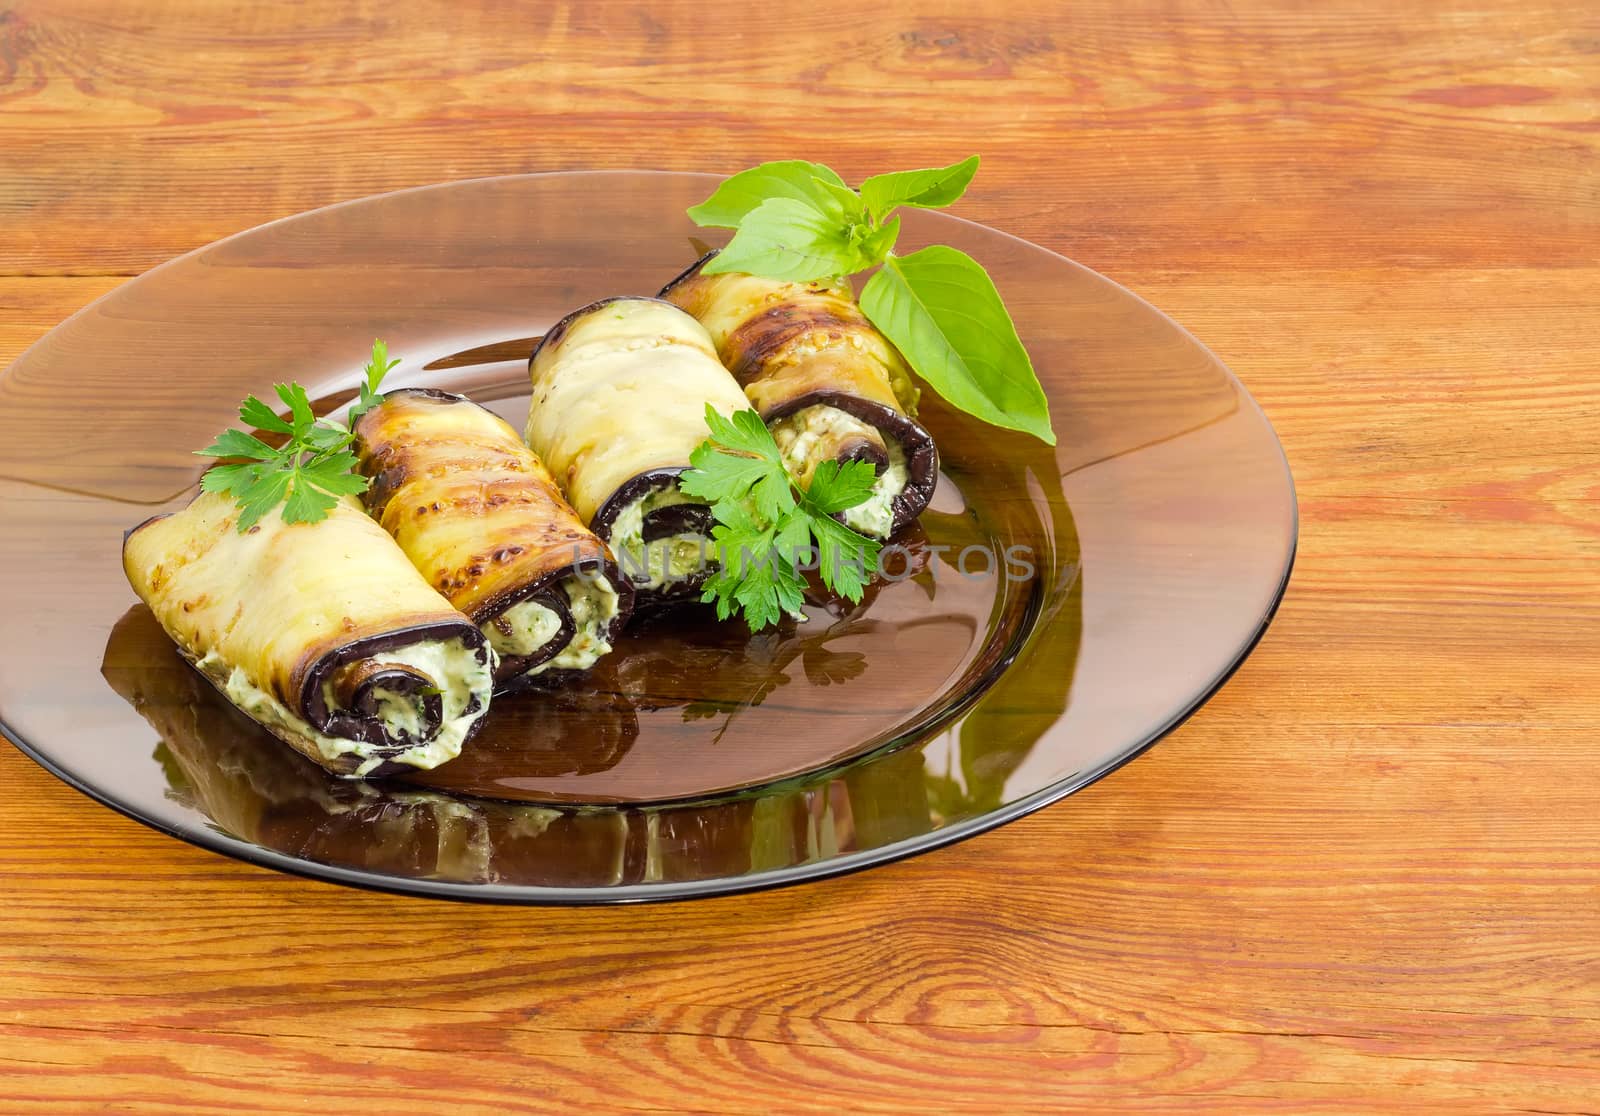 Stuffed eggplant rolls on glass dish on a wooden surface by anmbph